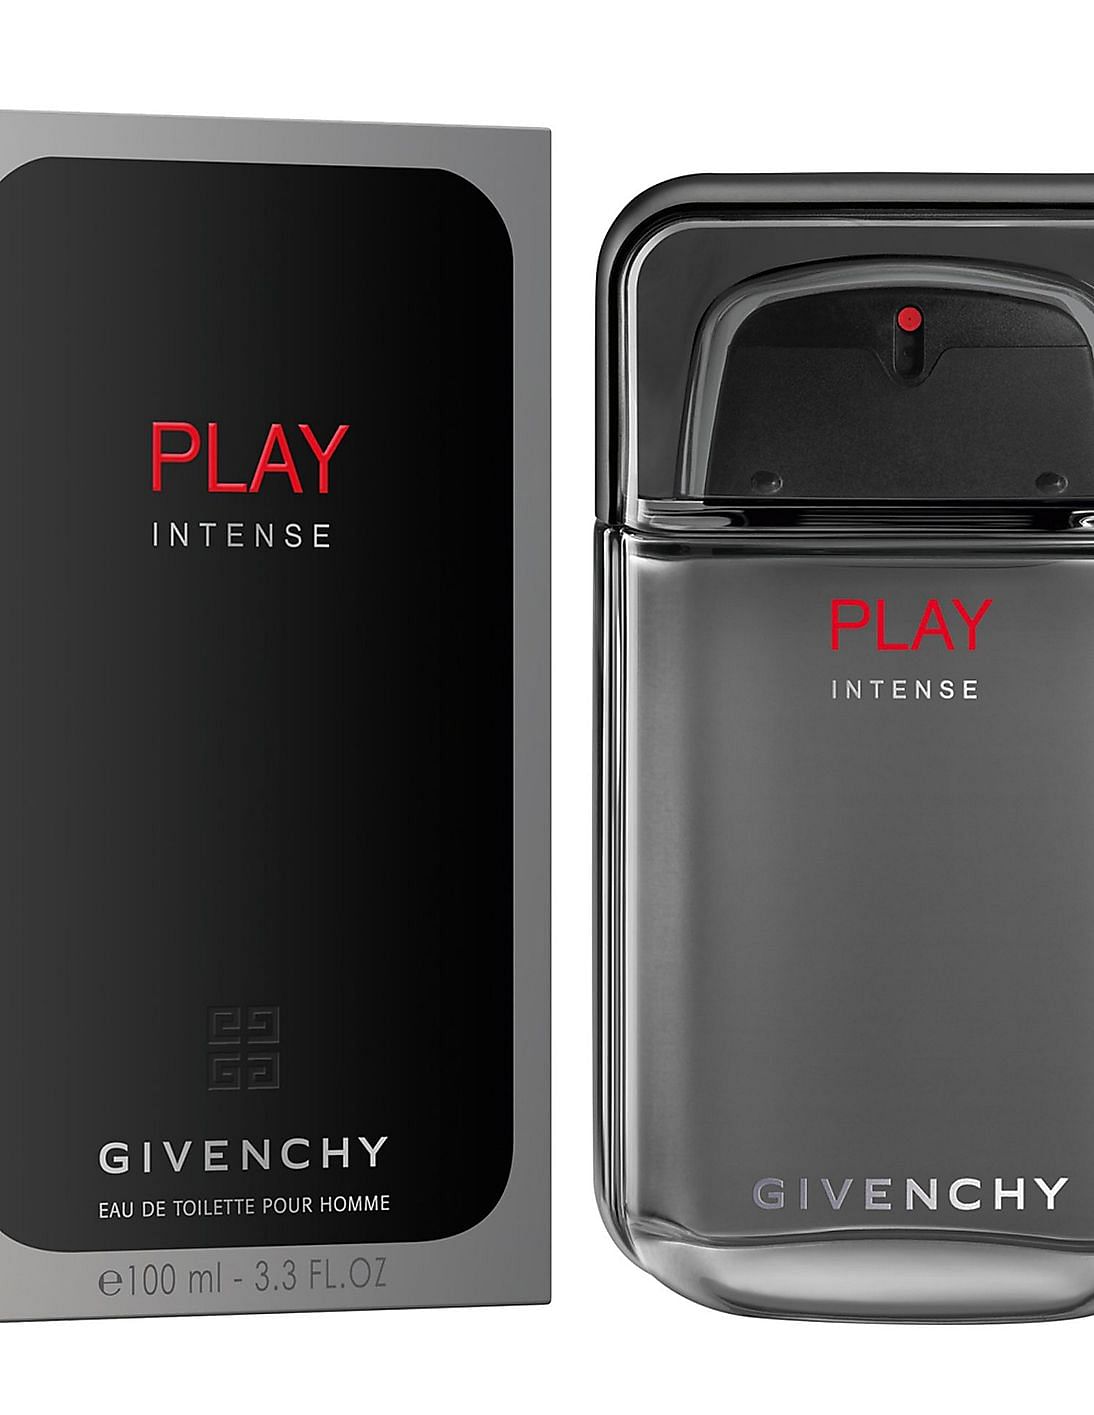 givenchy pour homme sephora